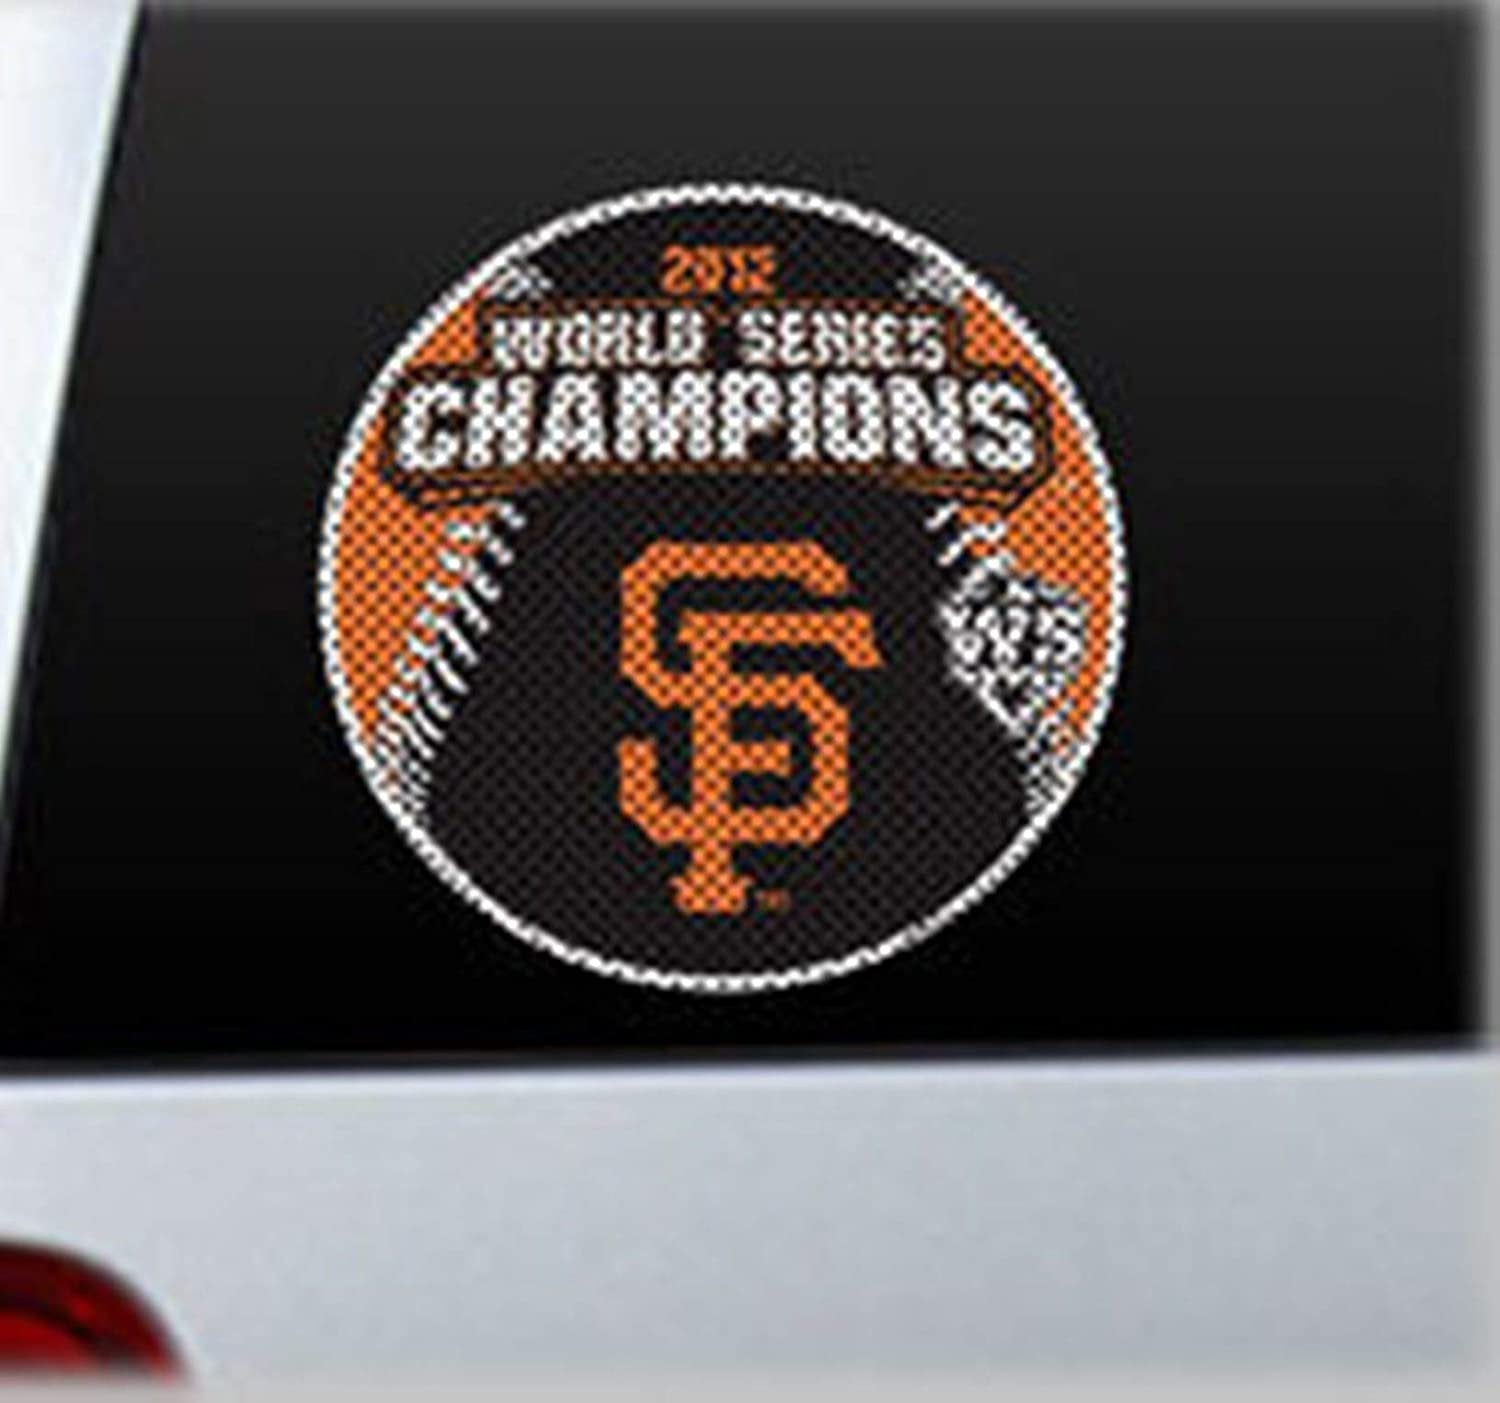 San Francisco Giants 2012 World Series Champions 12 Inch Preforated Window Film Decal Sticker, One-Way Vision, Adhesive Backing